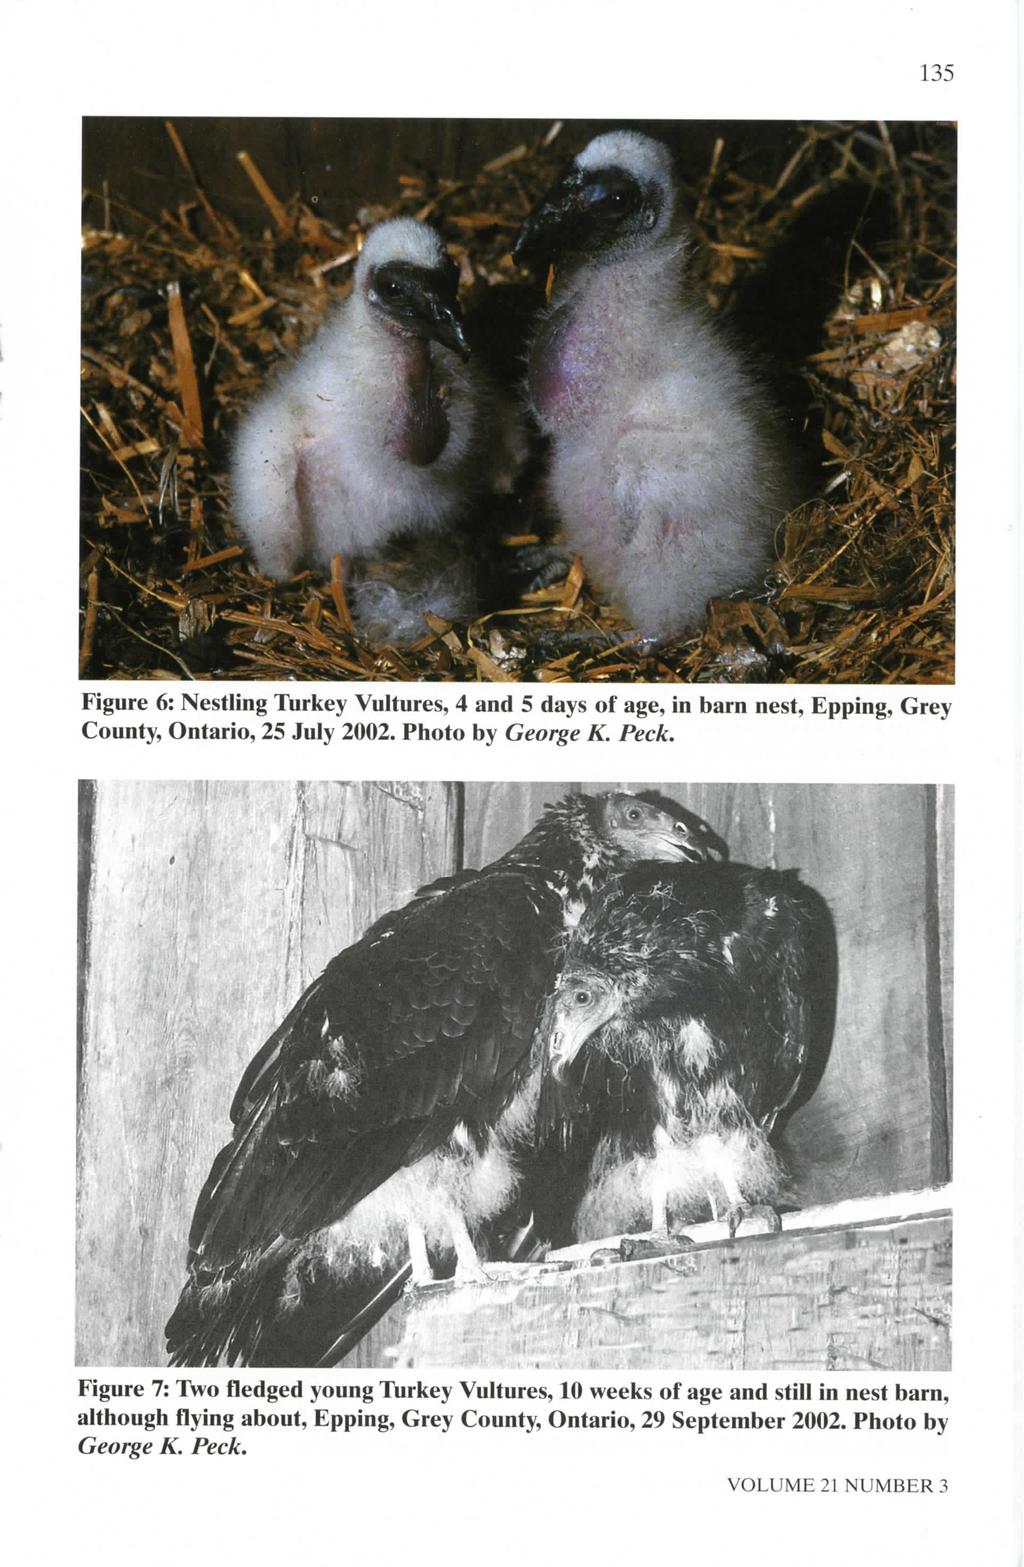 135 Figure 6: Nestling Turkey Vultures, 4 and 5 days of age, in barn nest, Epping, Grey County, Ontario, 25 July 2002. Photo by George K. Peck.